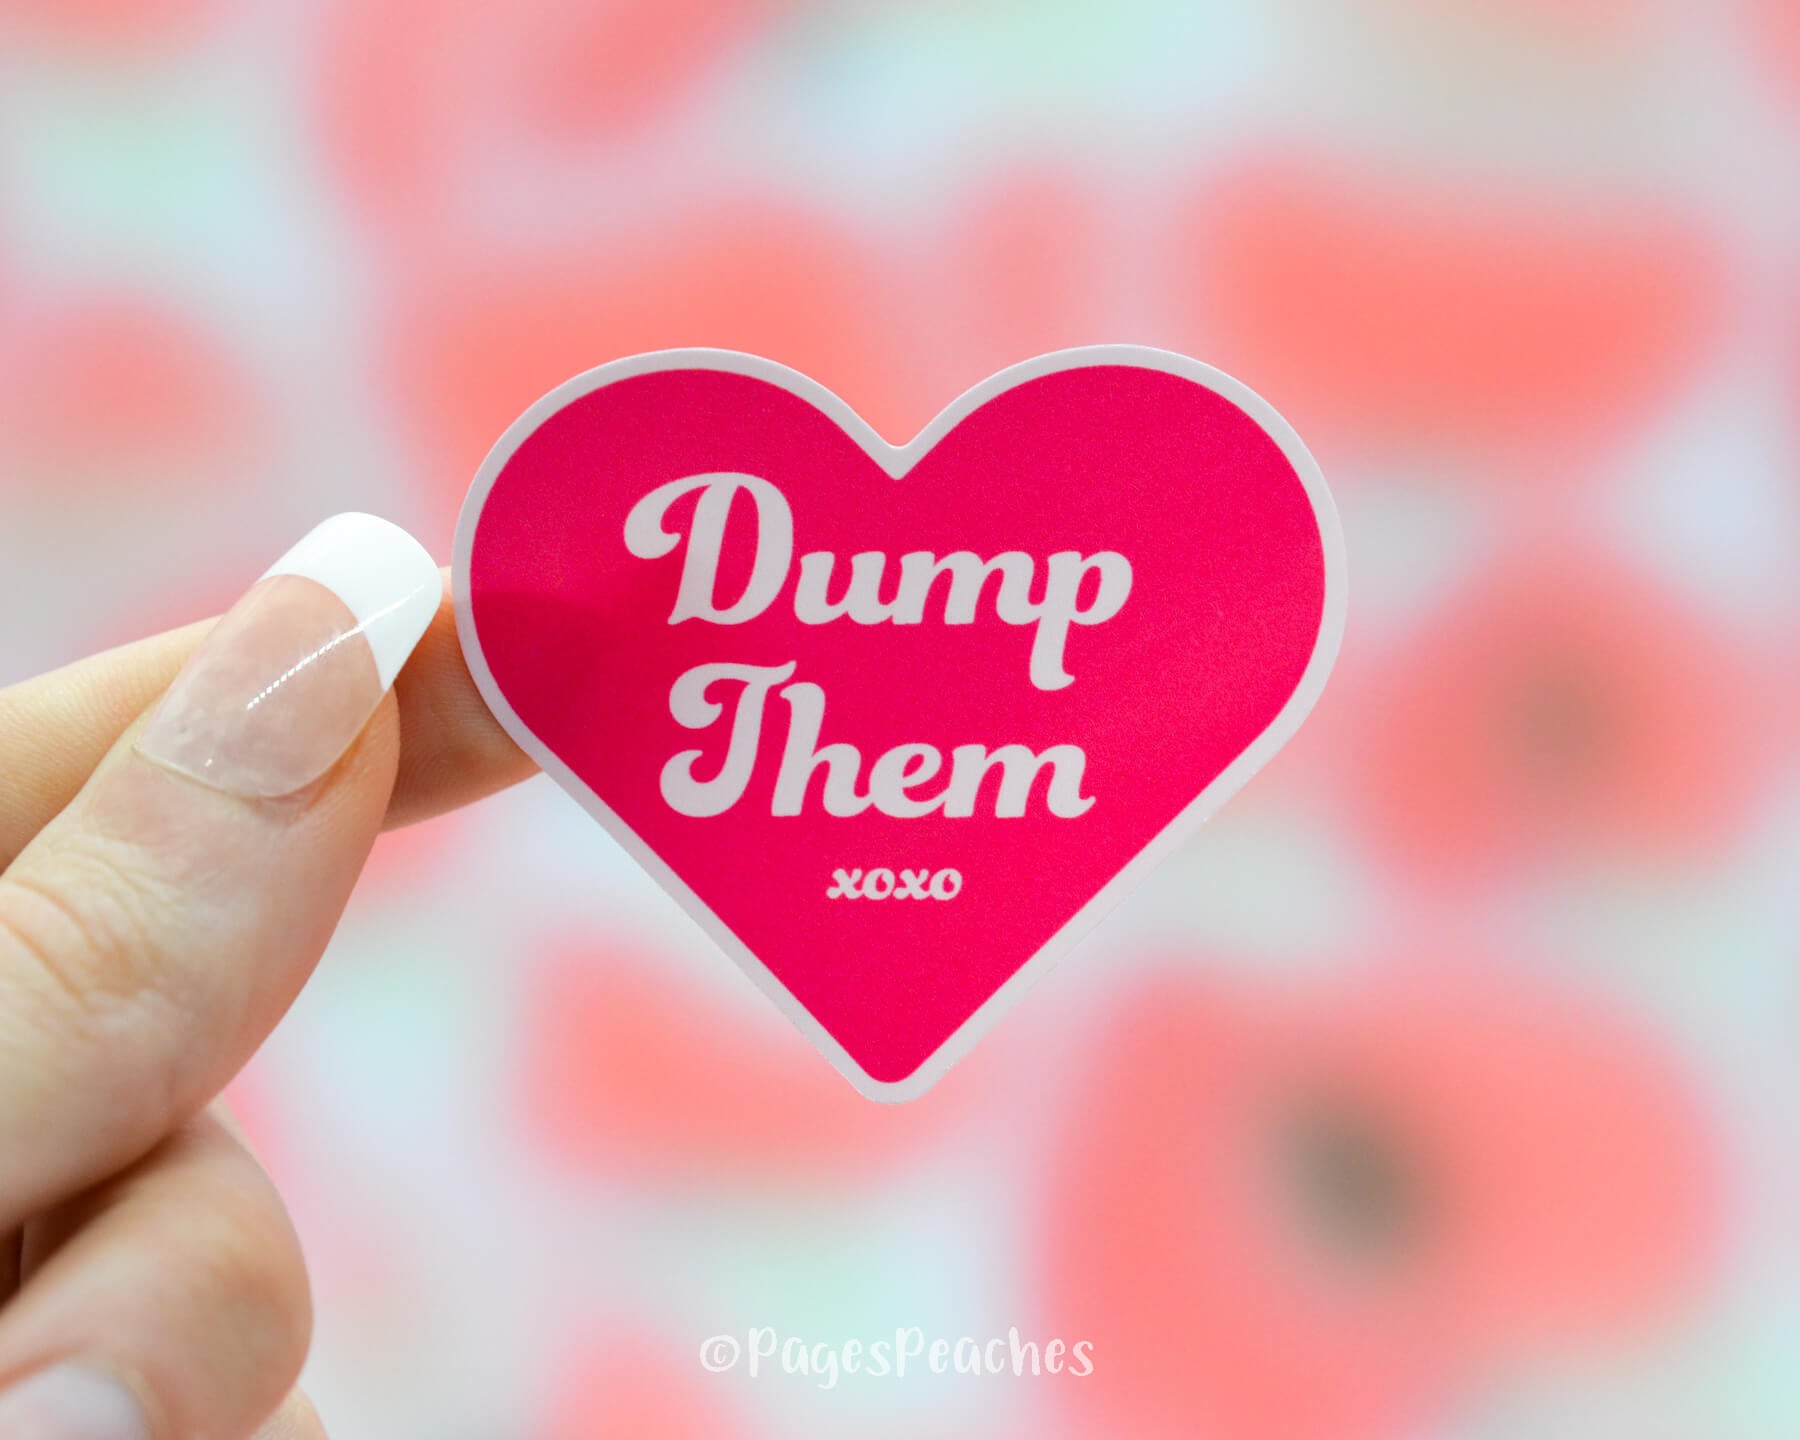 A Pink Waterproof sticker in the shape of a heart that says Dump Them